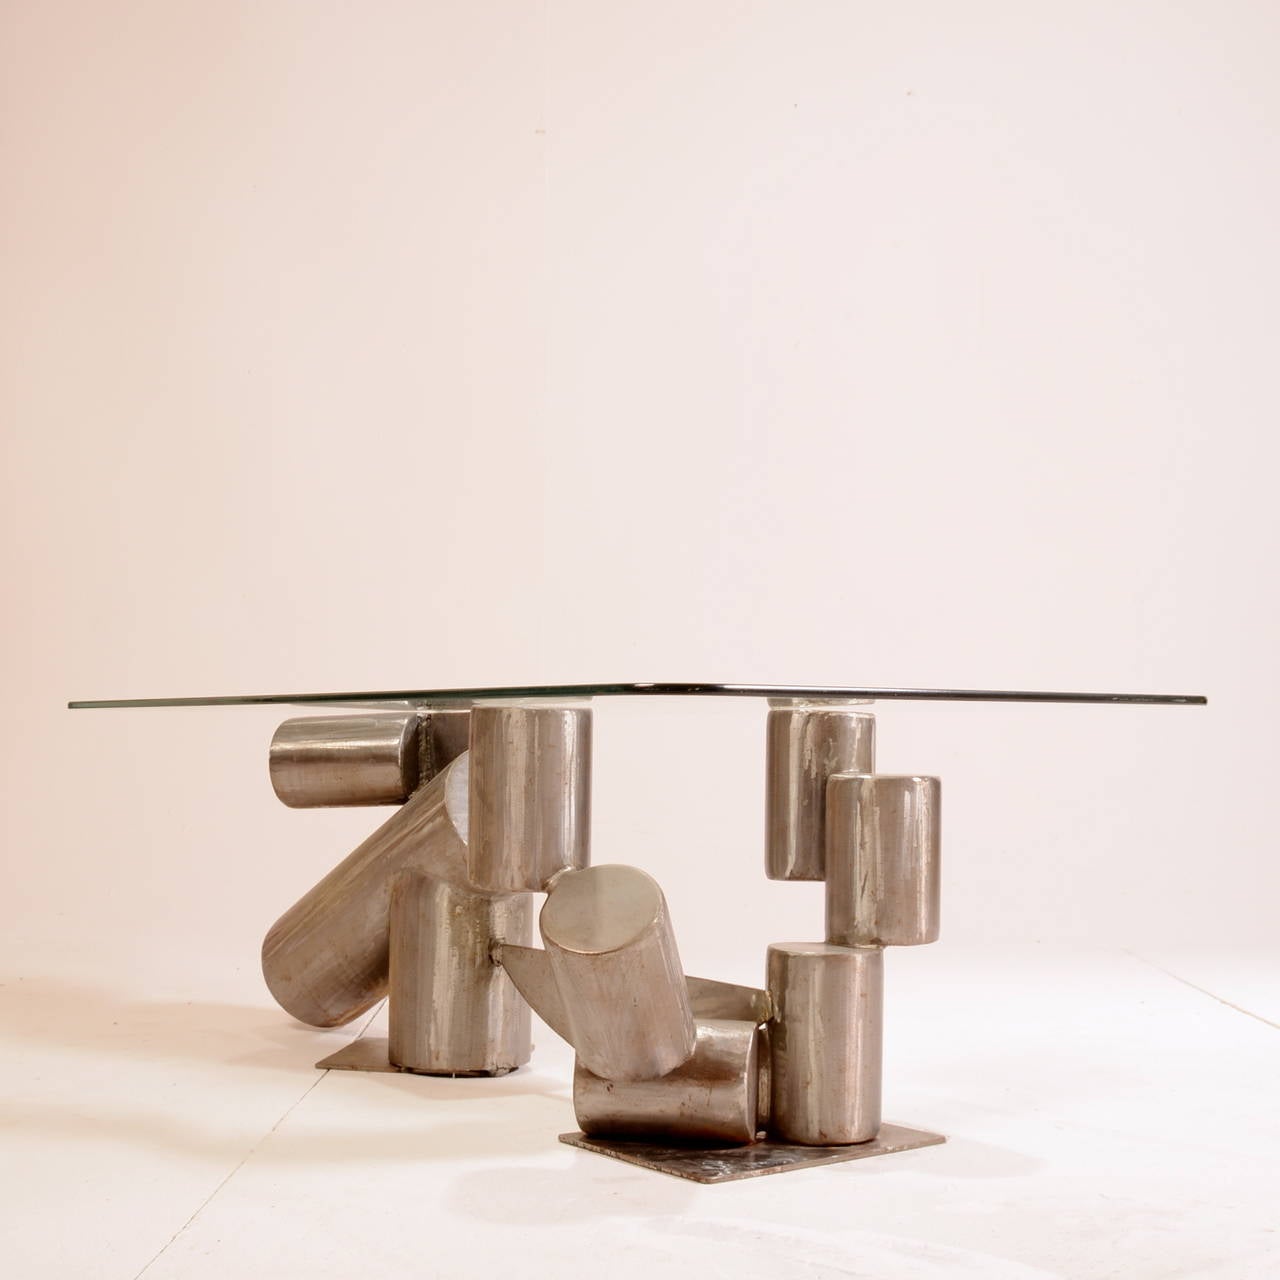 American California Modern Steel and Glass Sculpture Table 